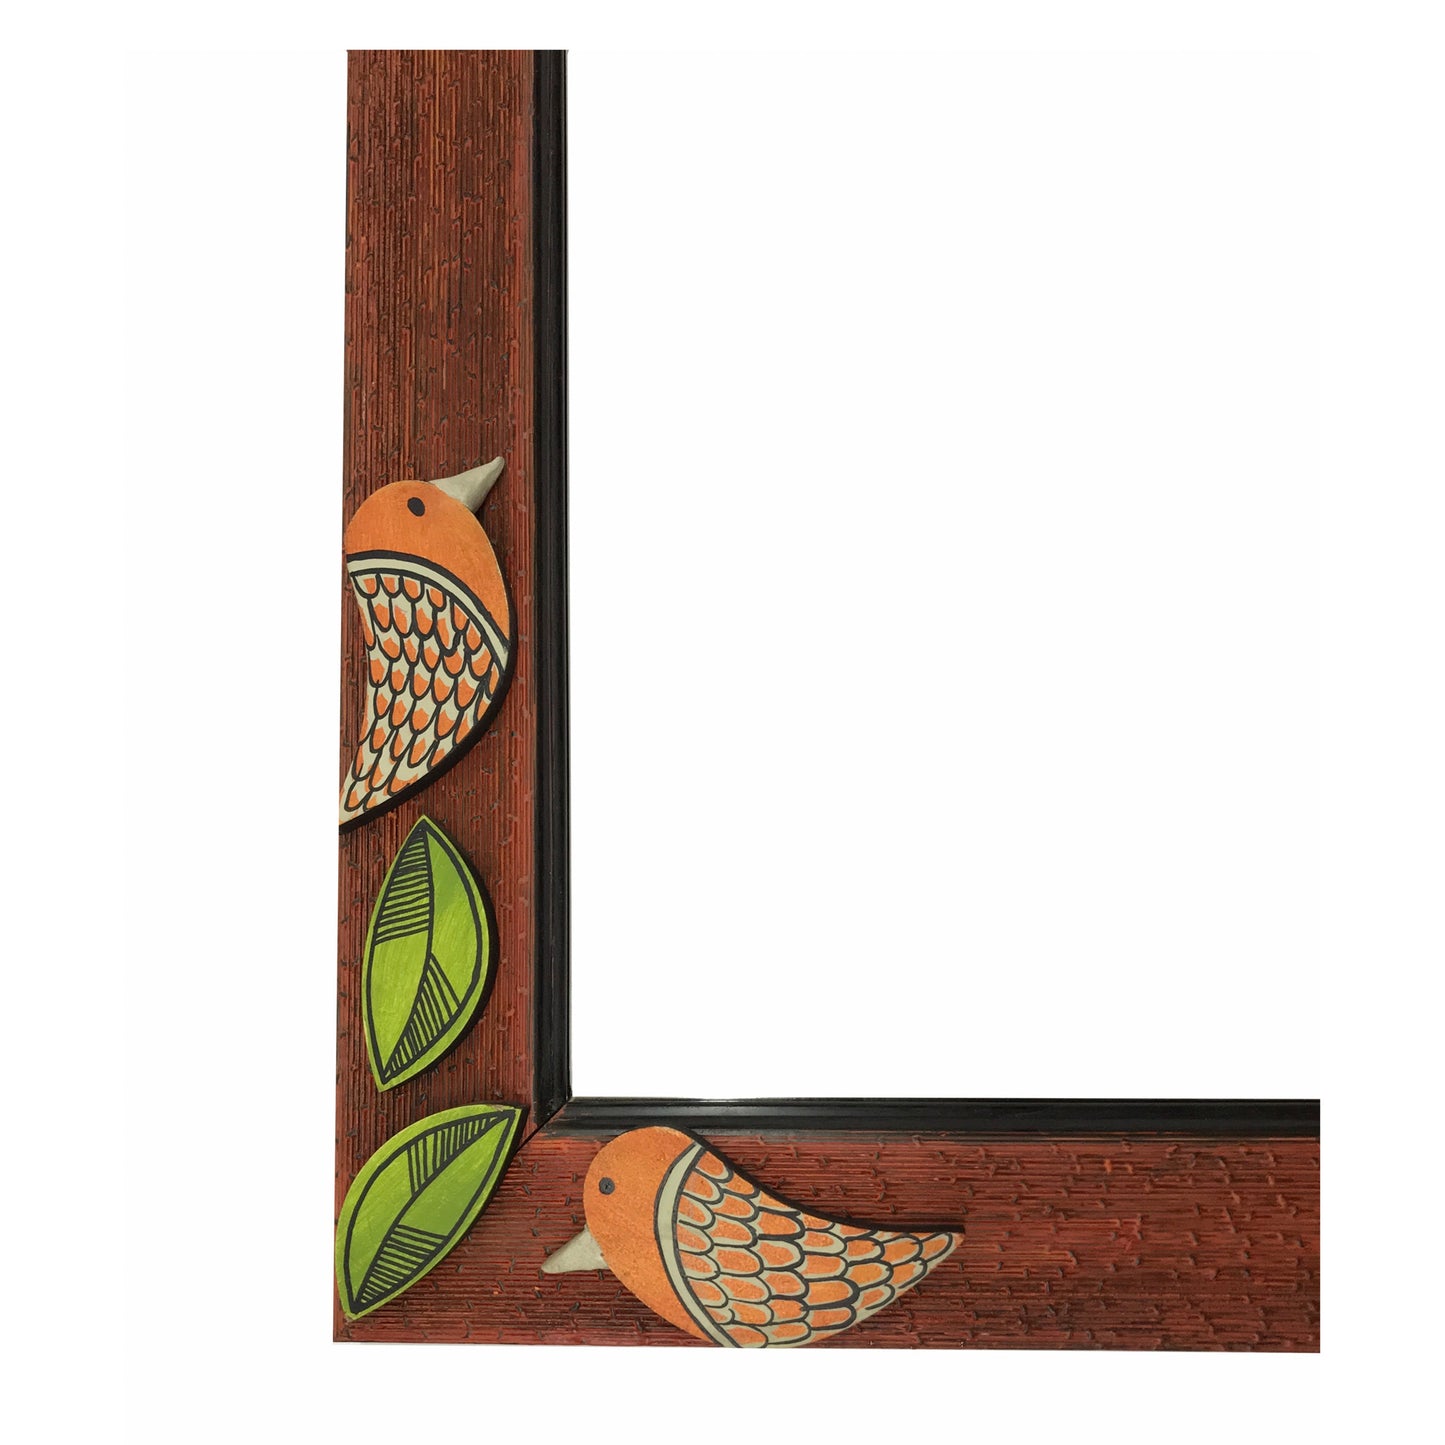 Mirror Handcrafted with Two Birds Tiles (12x16)